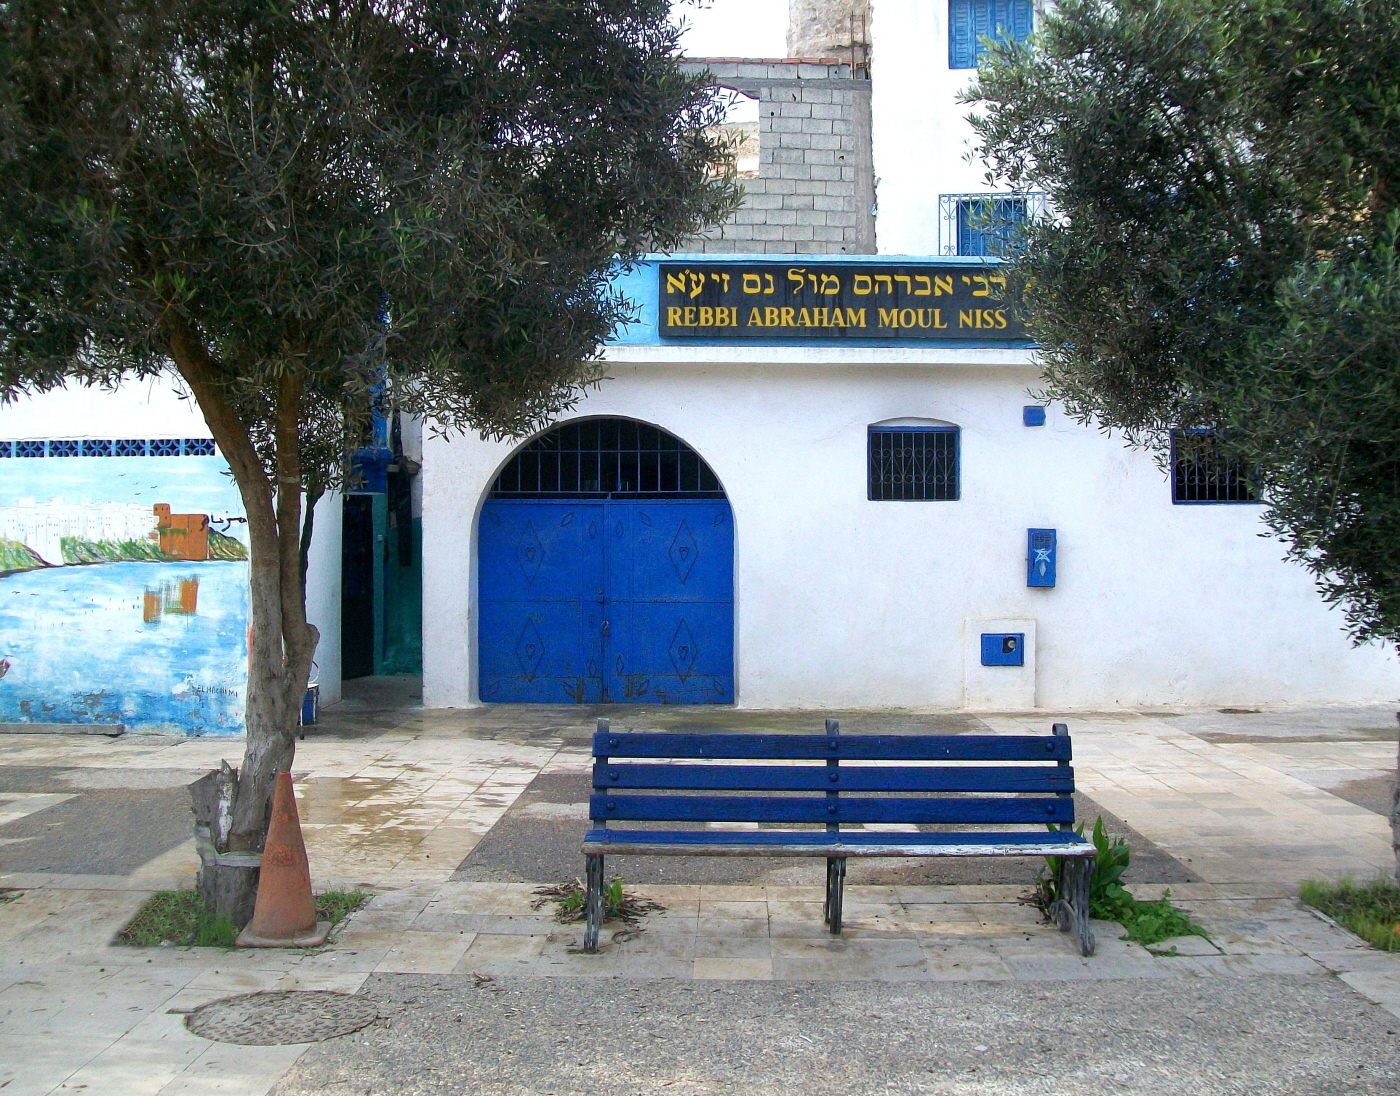 Shrine of Rabbi Abraham Moul Niss (1800's) Was revered by both Jewish & Muslim people -Azemmour